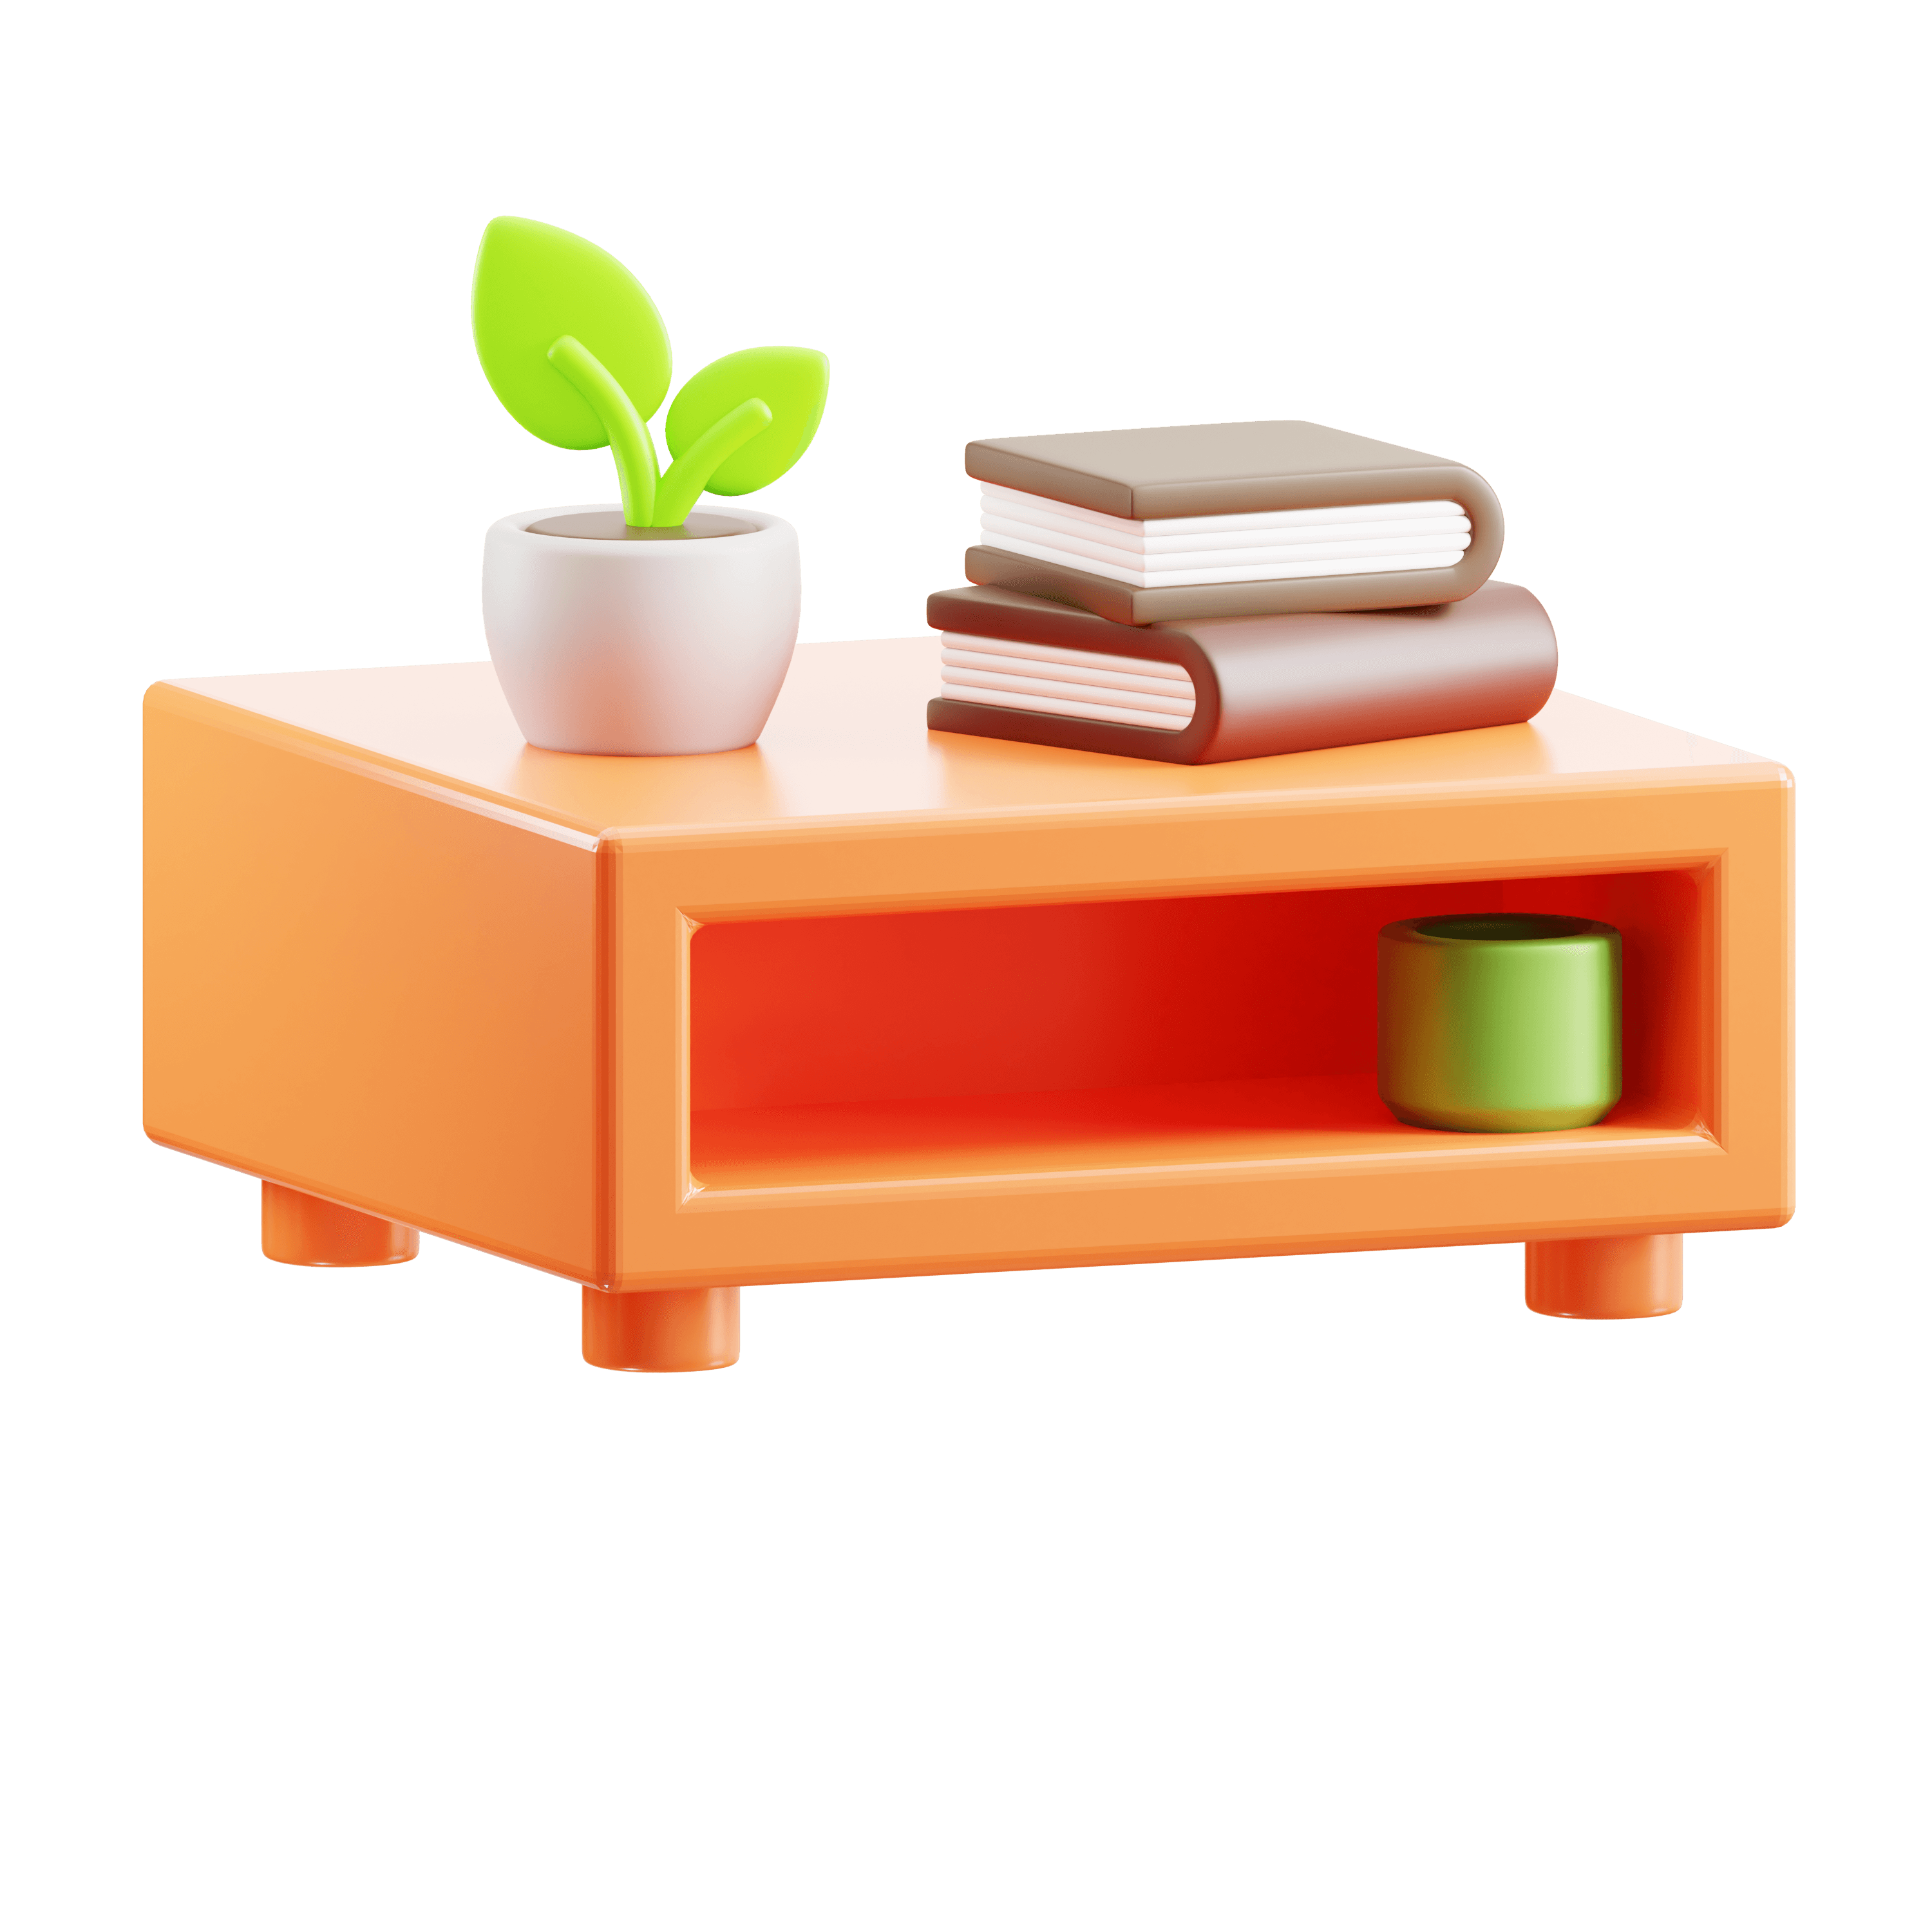 3D Furnitiure Models For Kids And Also Can Printable 3d model